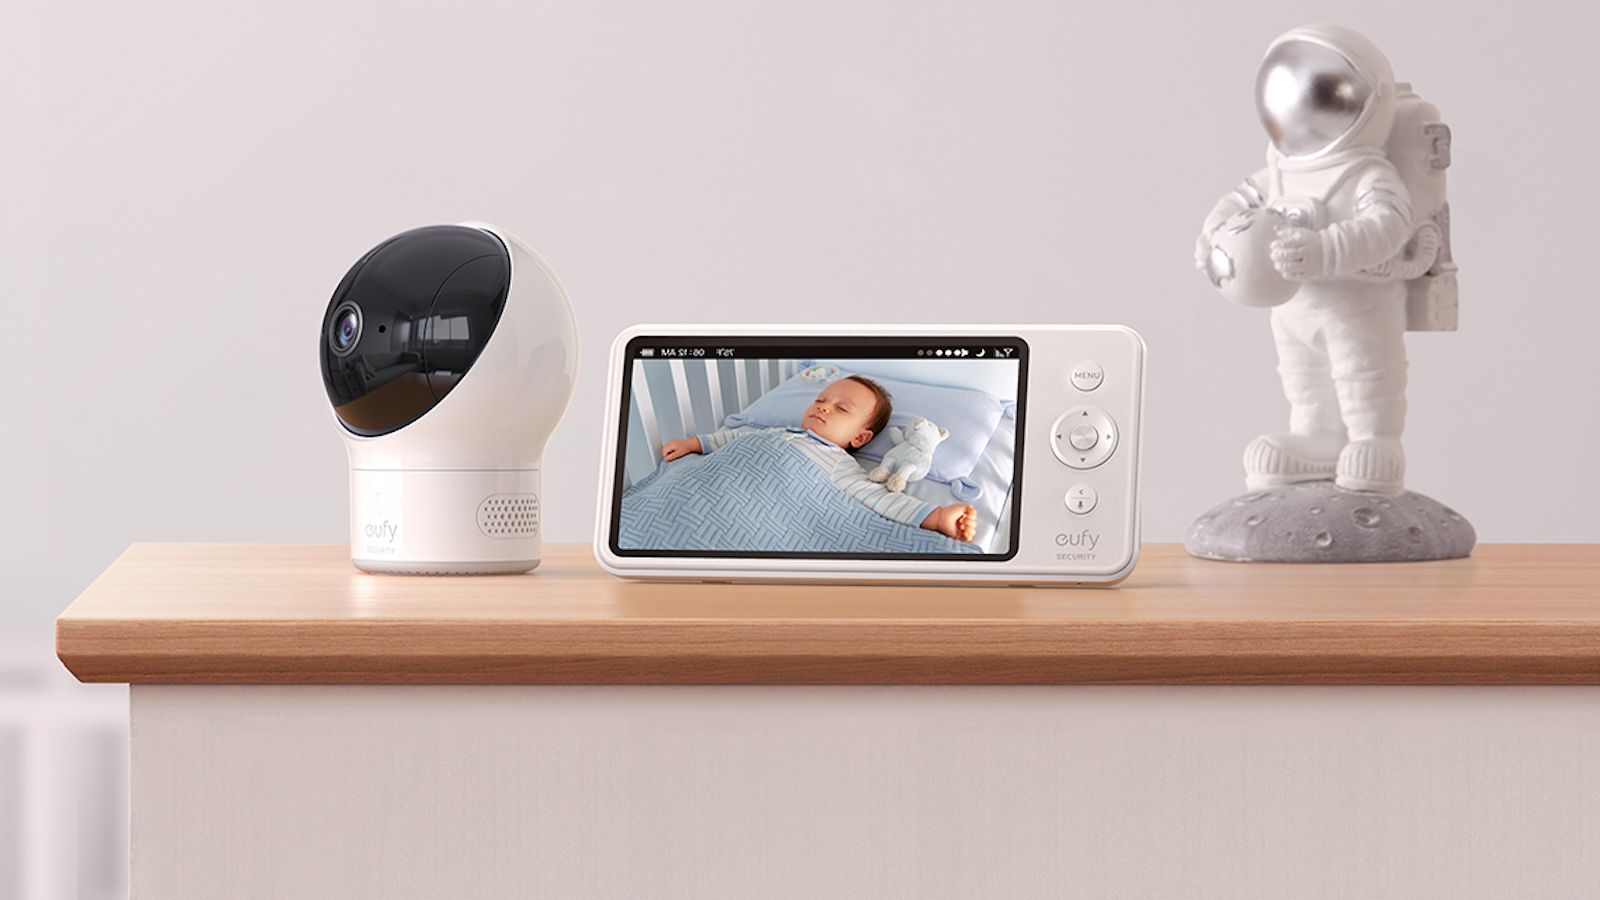 Angelcare Recalls to Repair Movement and Sound Baby Monitors After